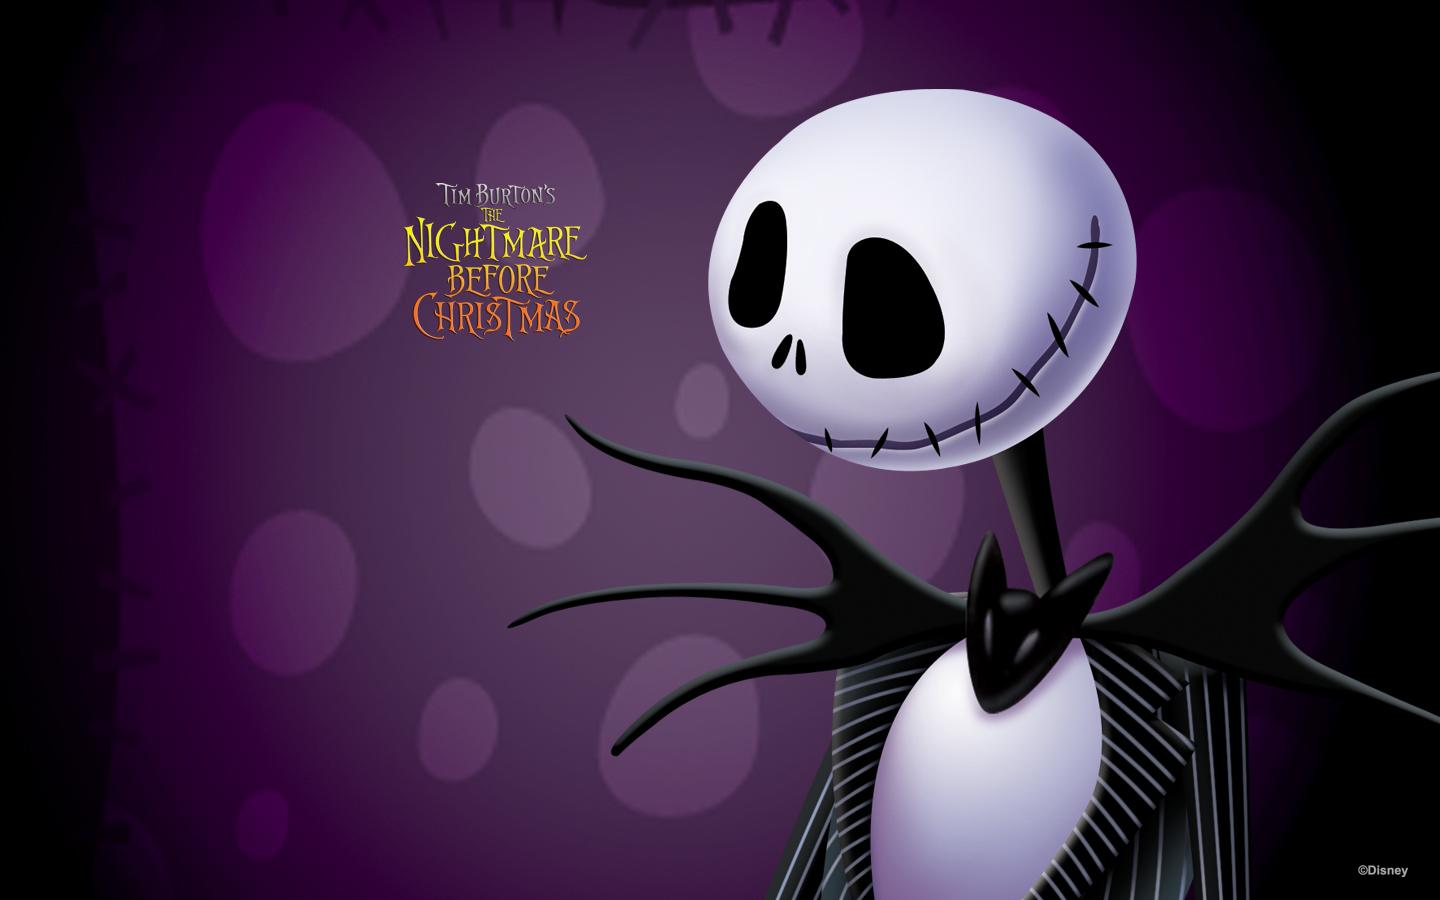  nightmare before christmas go to trailer for the nightmare before